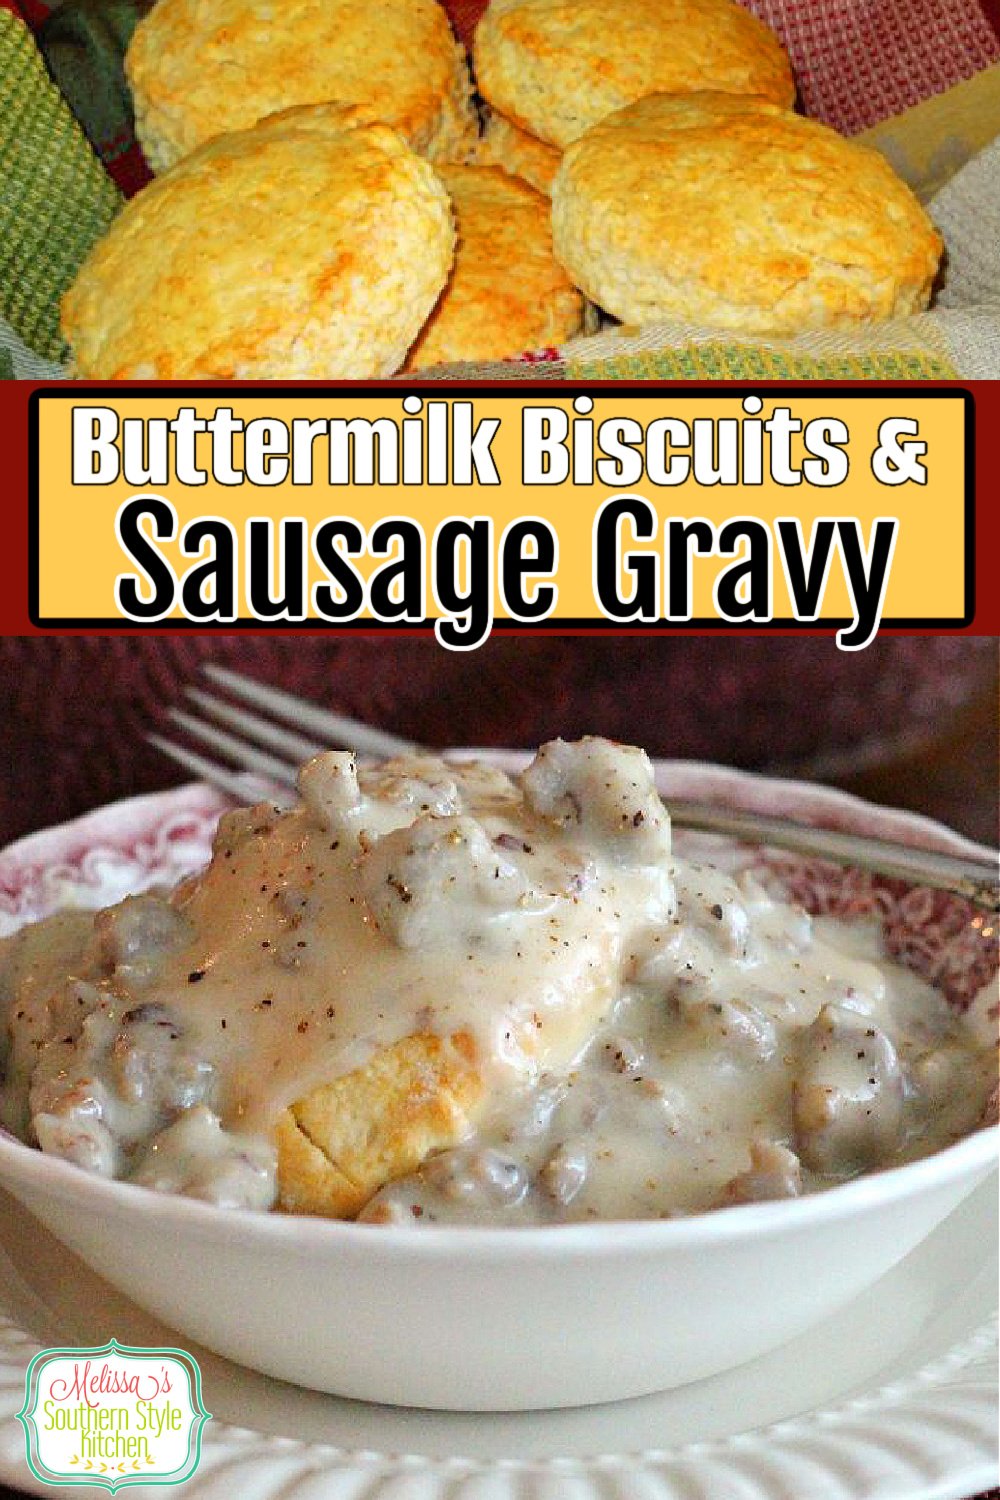 Start your morning with a bowl filled with comforting Buttermilk Biscuits and Sausage Gravy #biscuitsandgravy #buttermilkbiscuits #sausagegravyrecipe #brunch #breakfast #sausage #holidaybrunch #southernfood #southernrecipes #southernbiscuits via @melissasssk